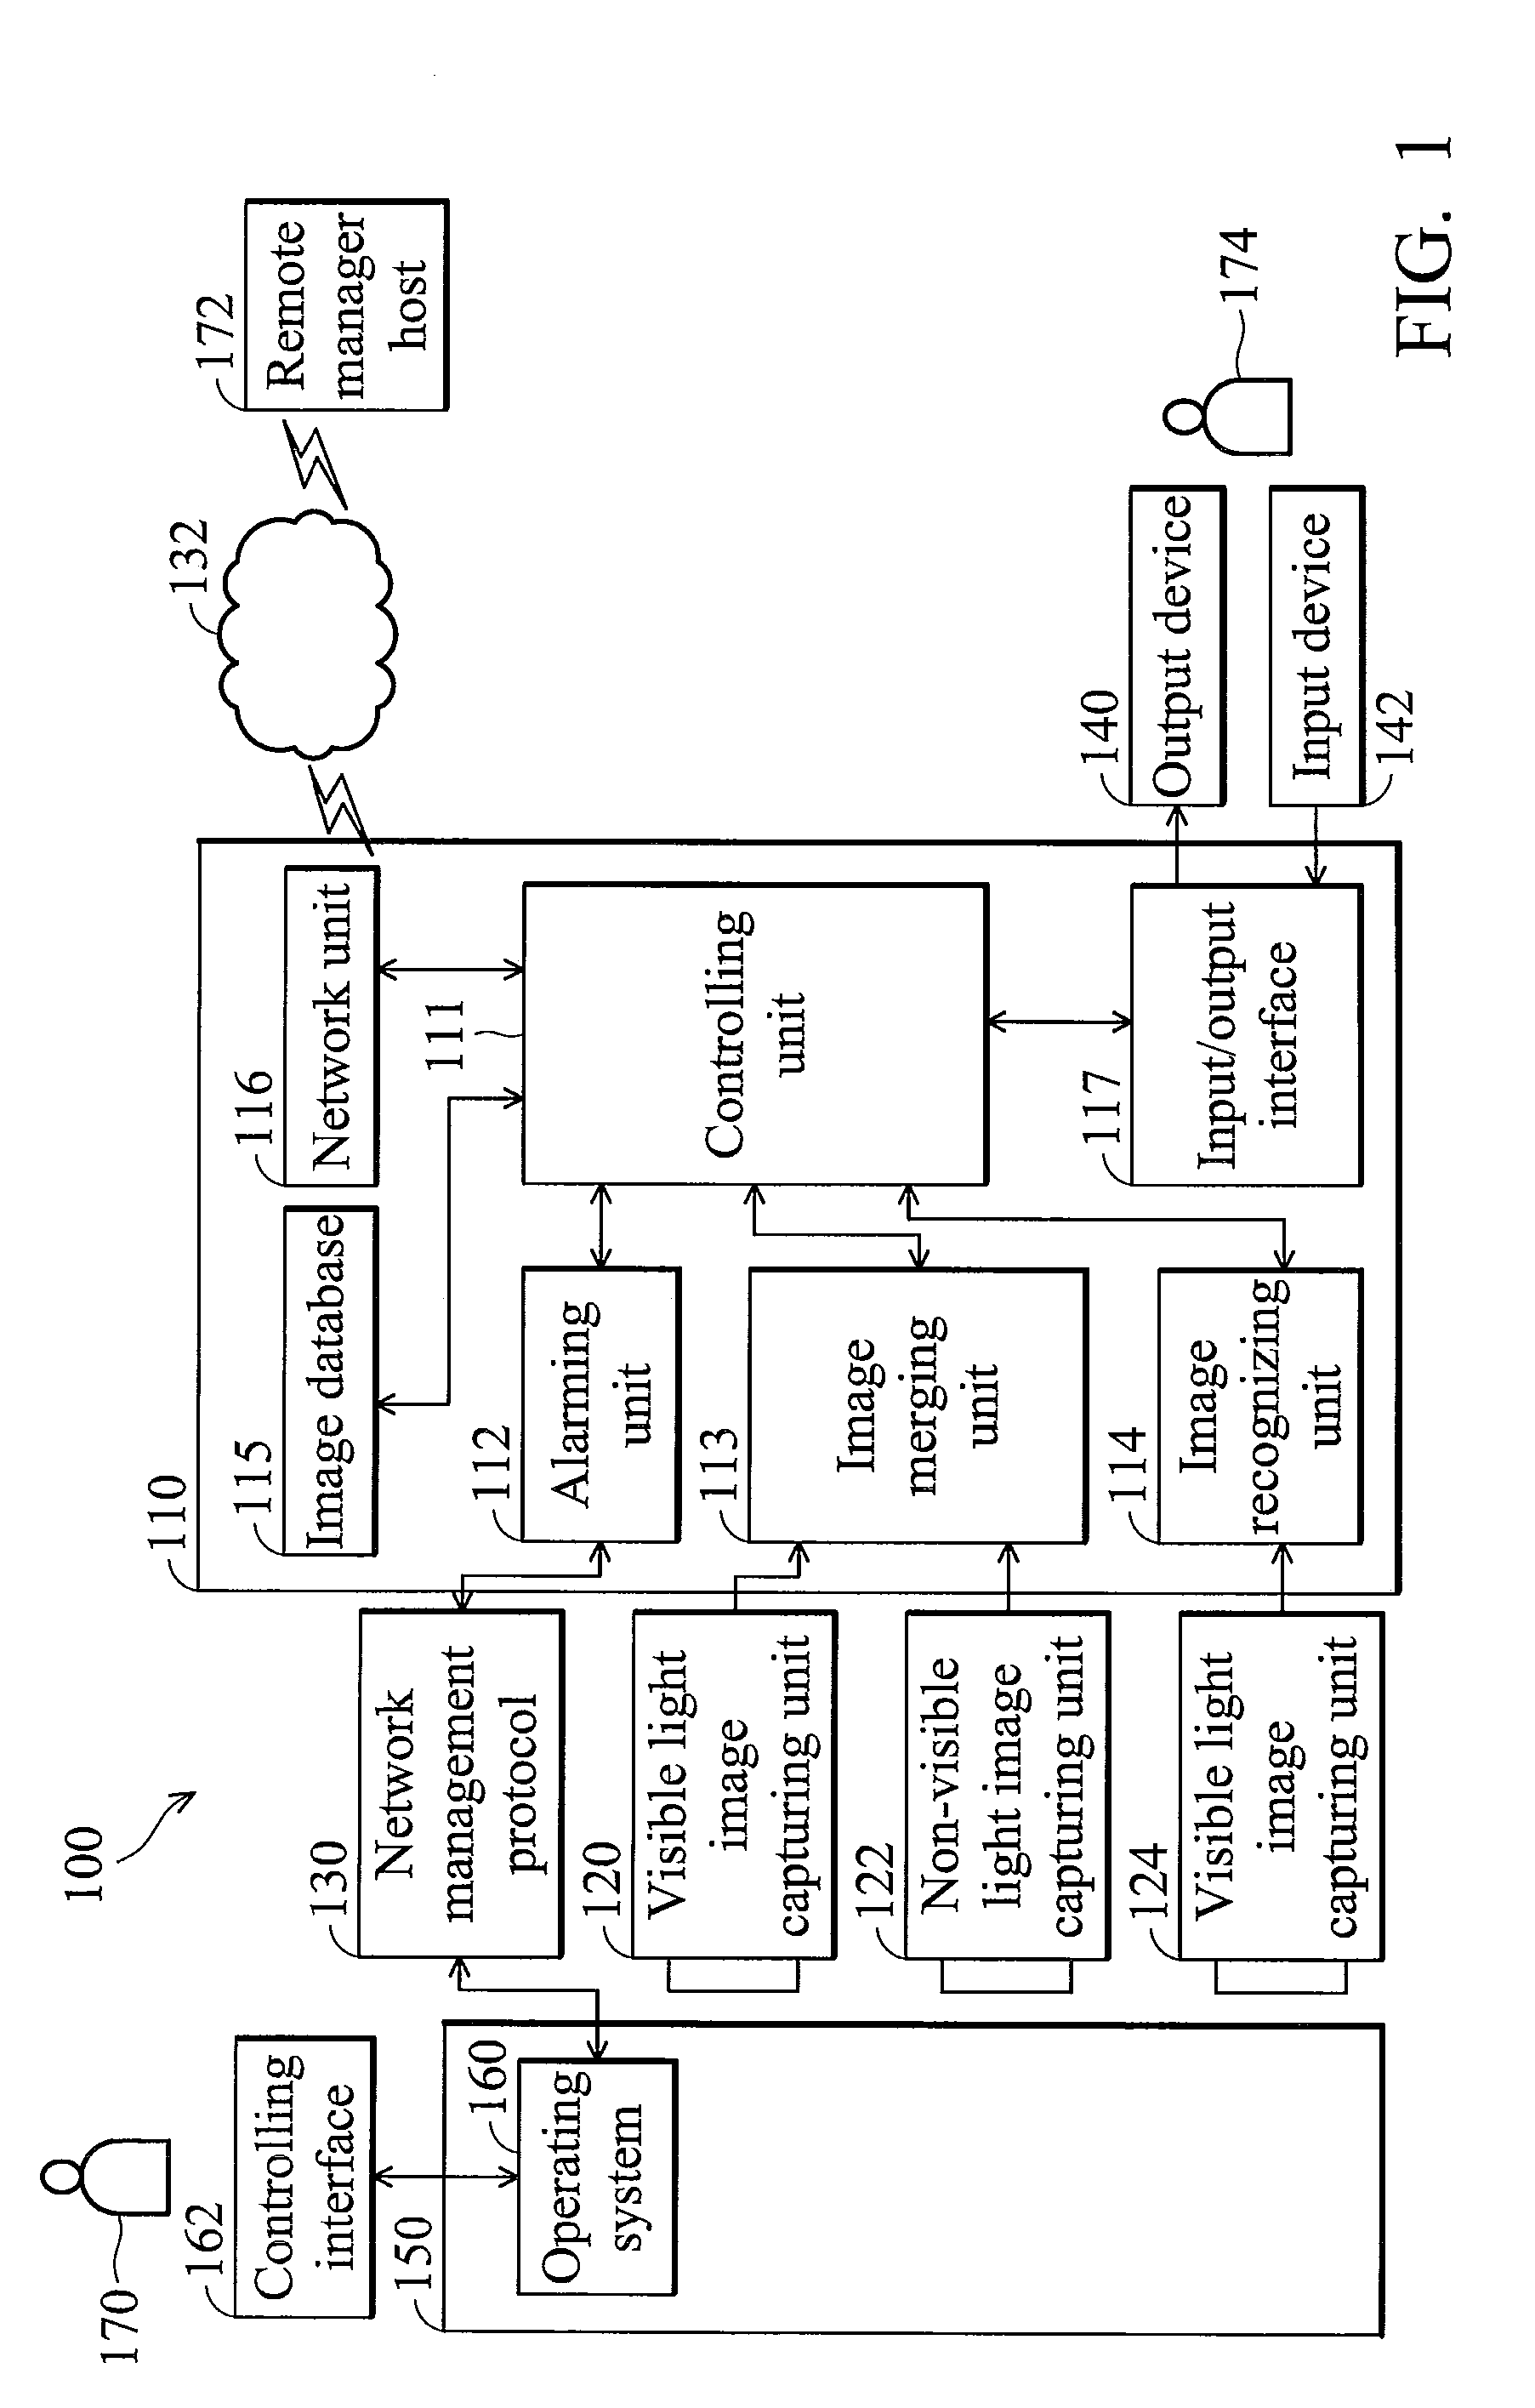 Monitoring and managing device, monitoring and managing system and method of data center